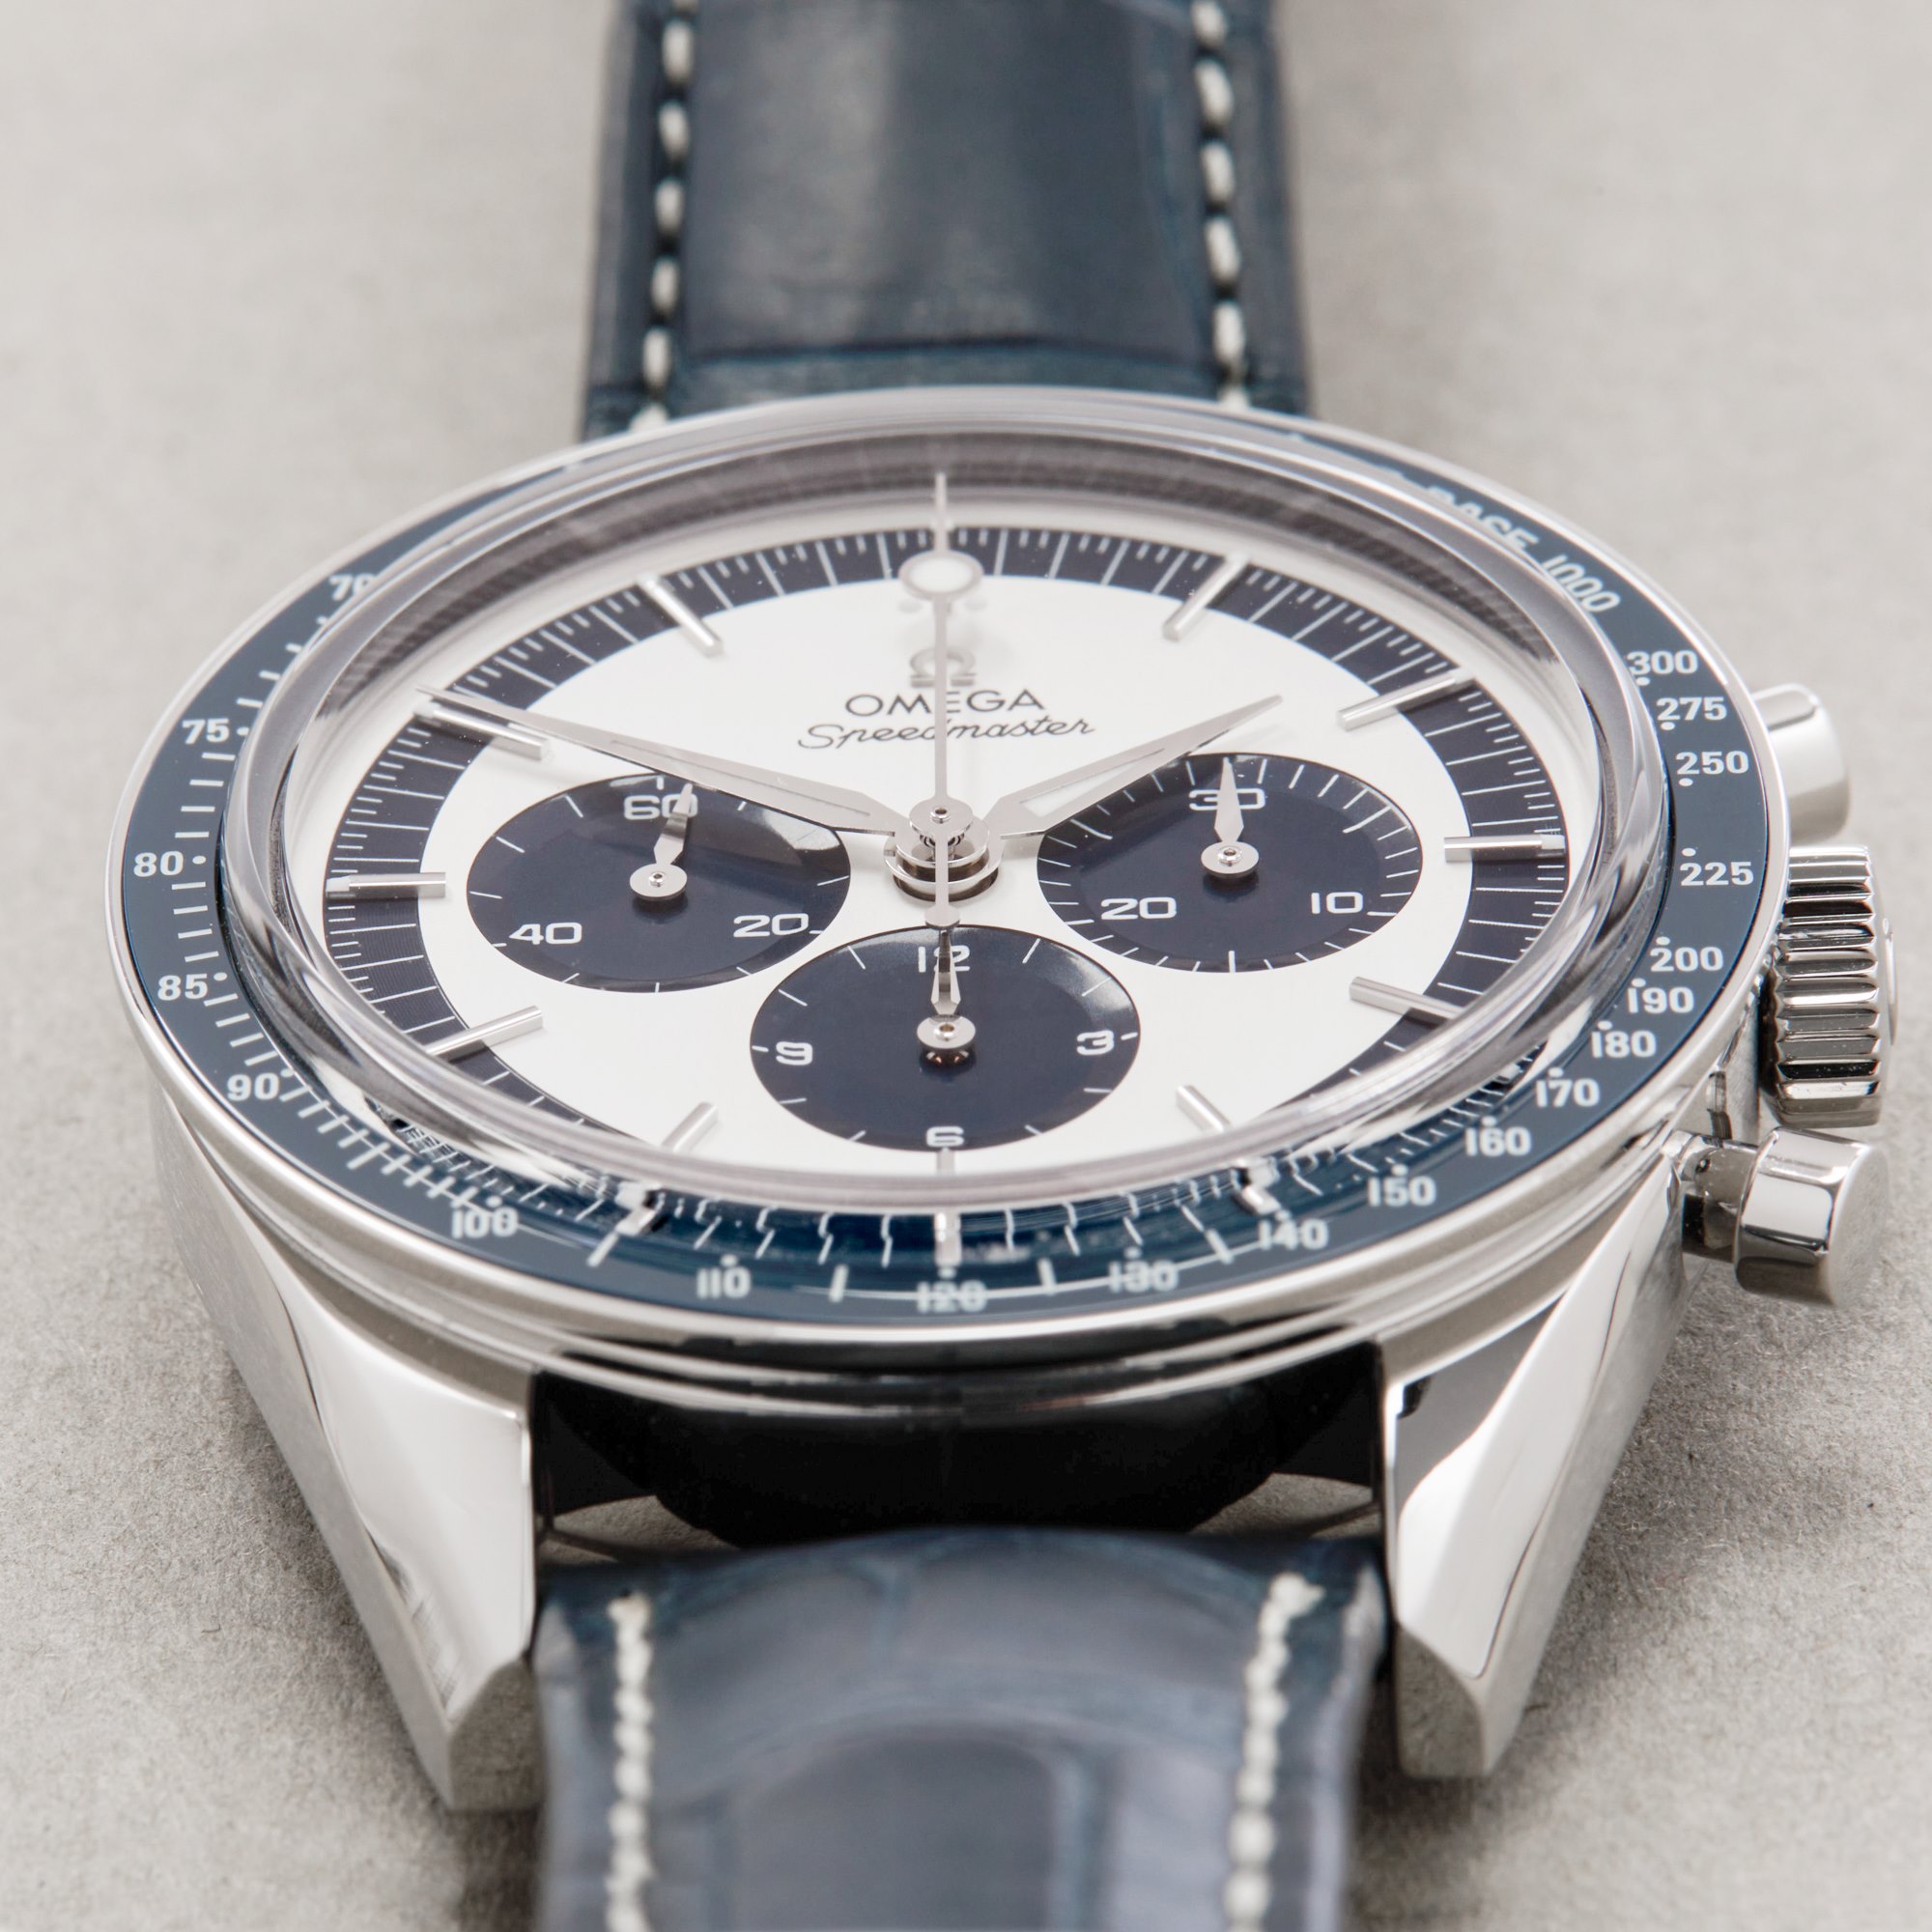 Omega Speedmaster Limited Edition of 998 Pieces CK2998 Stainless Steel 311.33.40.30.02.001